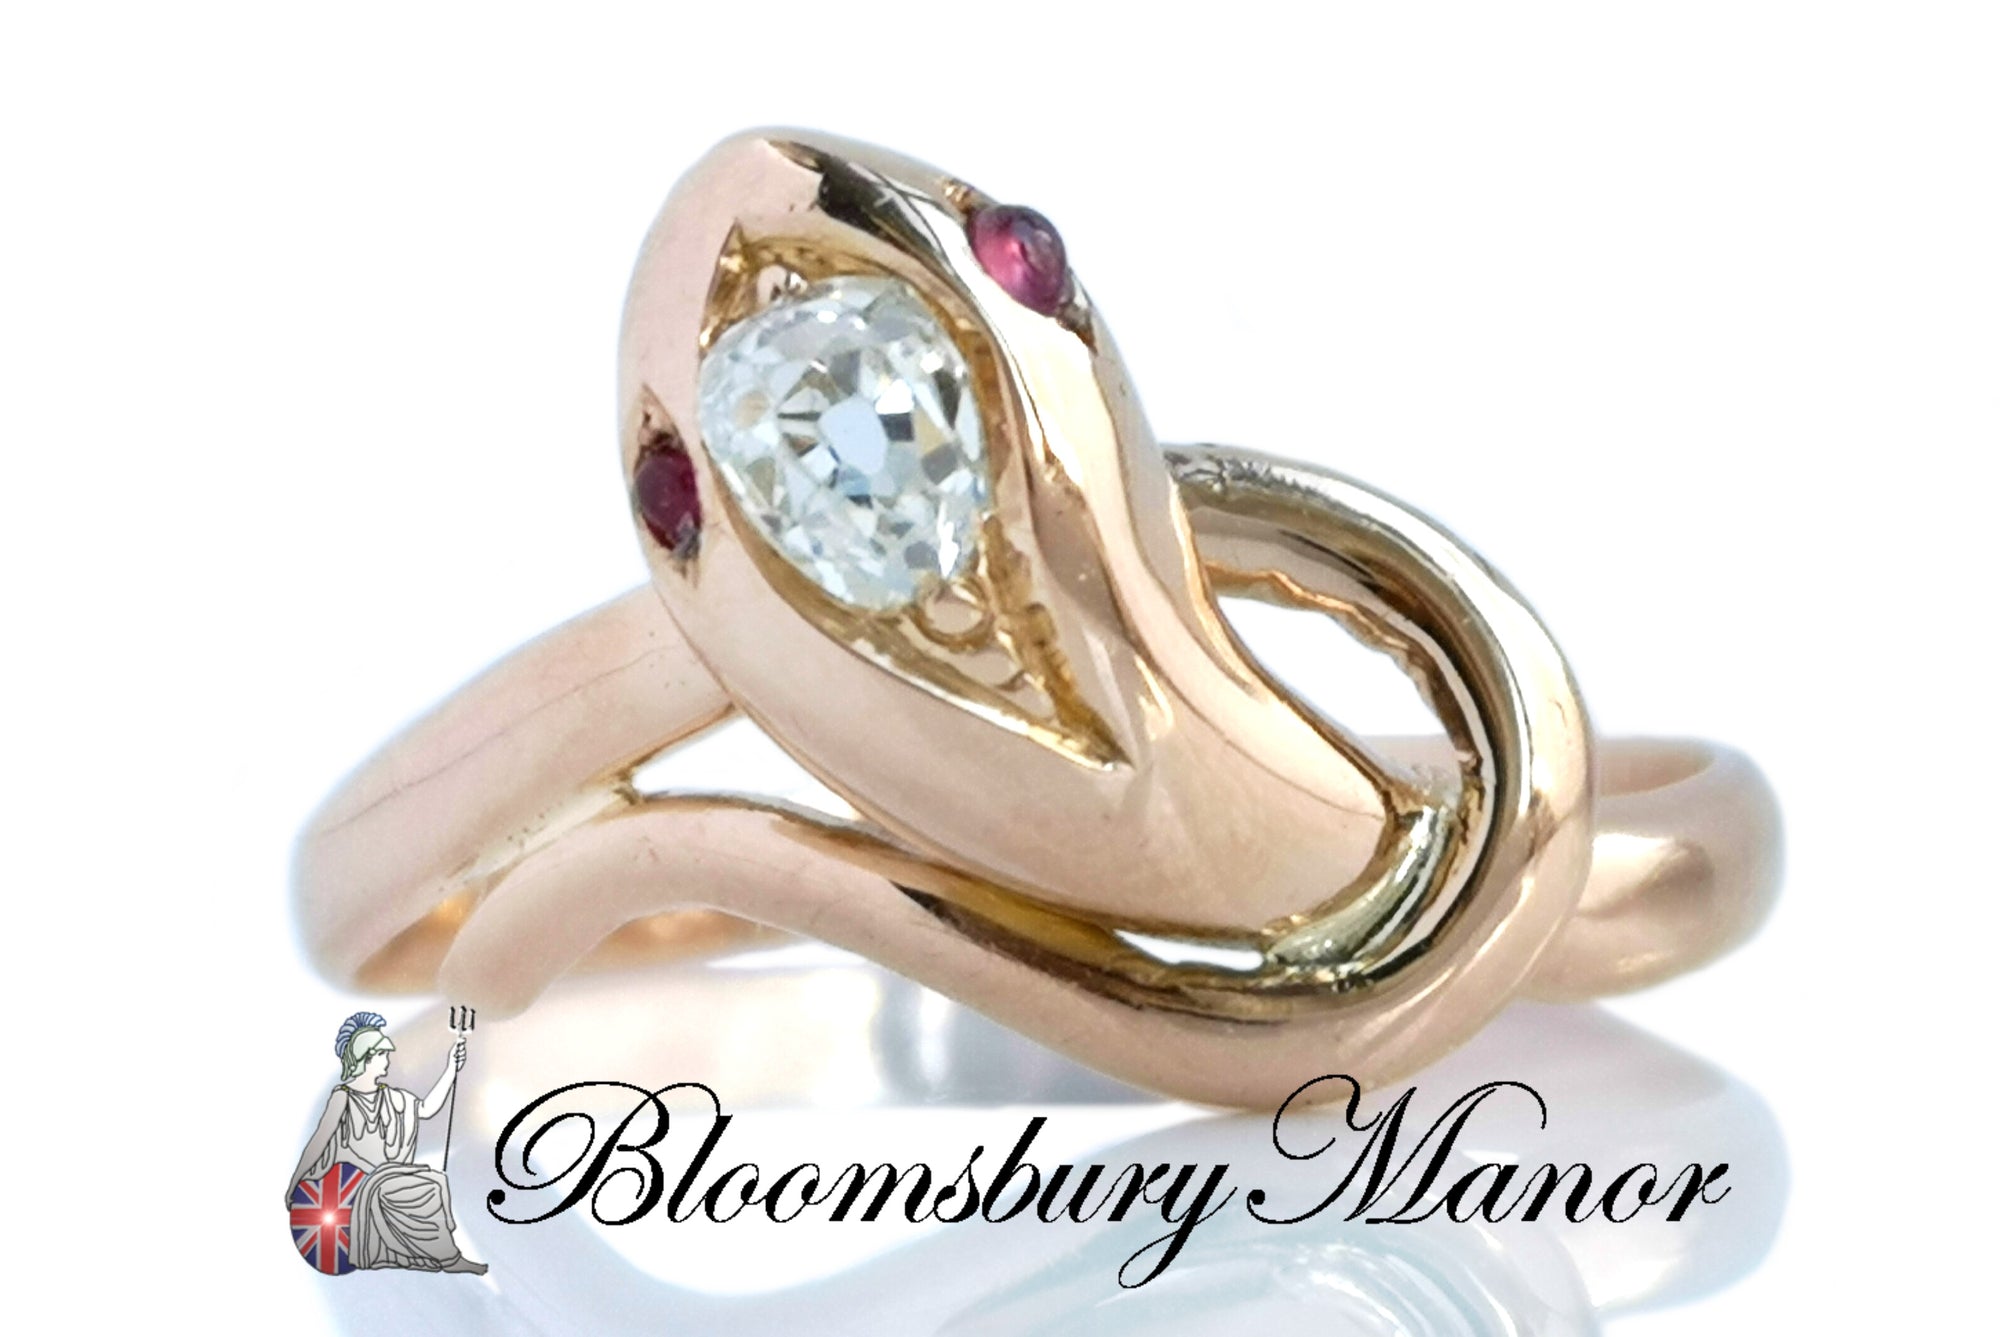 Antique French 18k Rose Gold Serpent Ring .10ct Old Mine Cut Diamond Cabochon Ruby Eyes